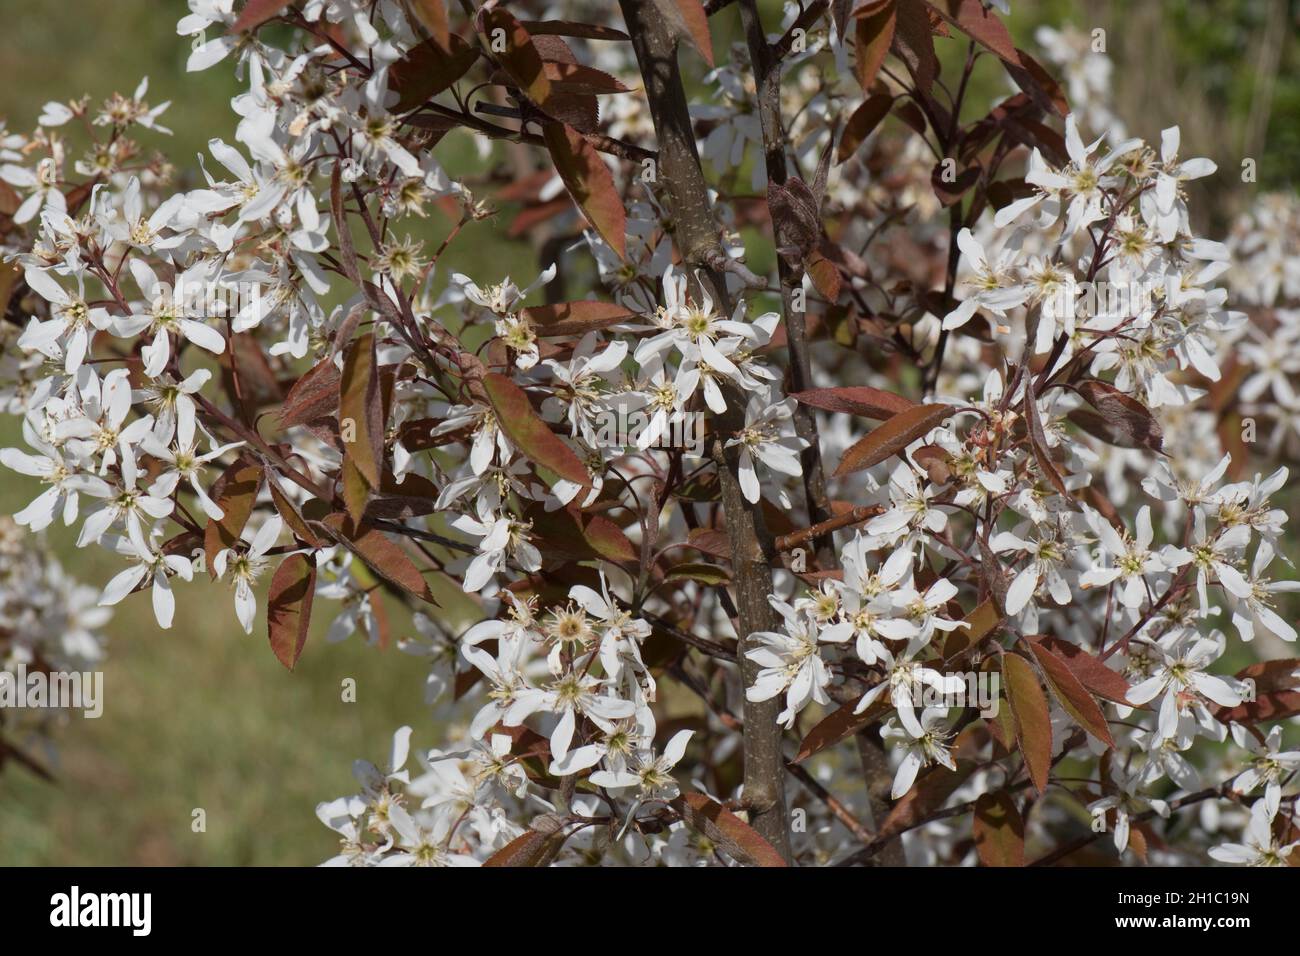 Snowy mespilus or serviceberry (Amelanchier lamarckii) flowers and dark red young leaves in spring, Berkshire, April Stock Photo